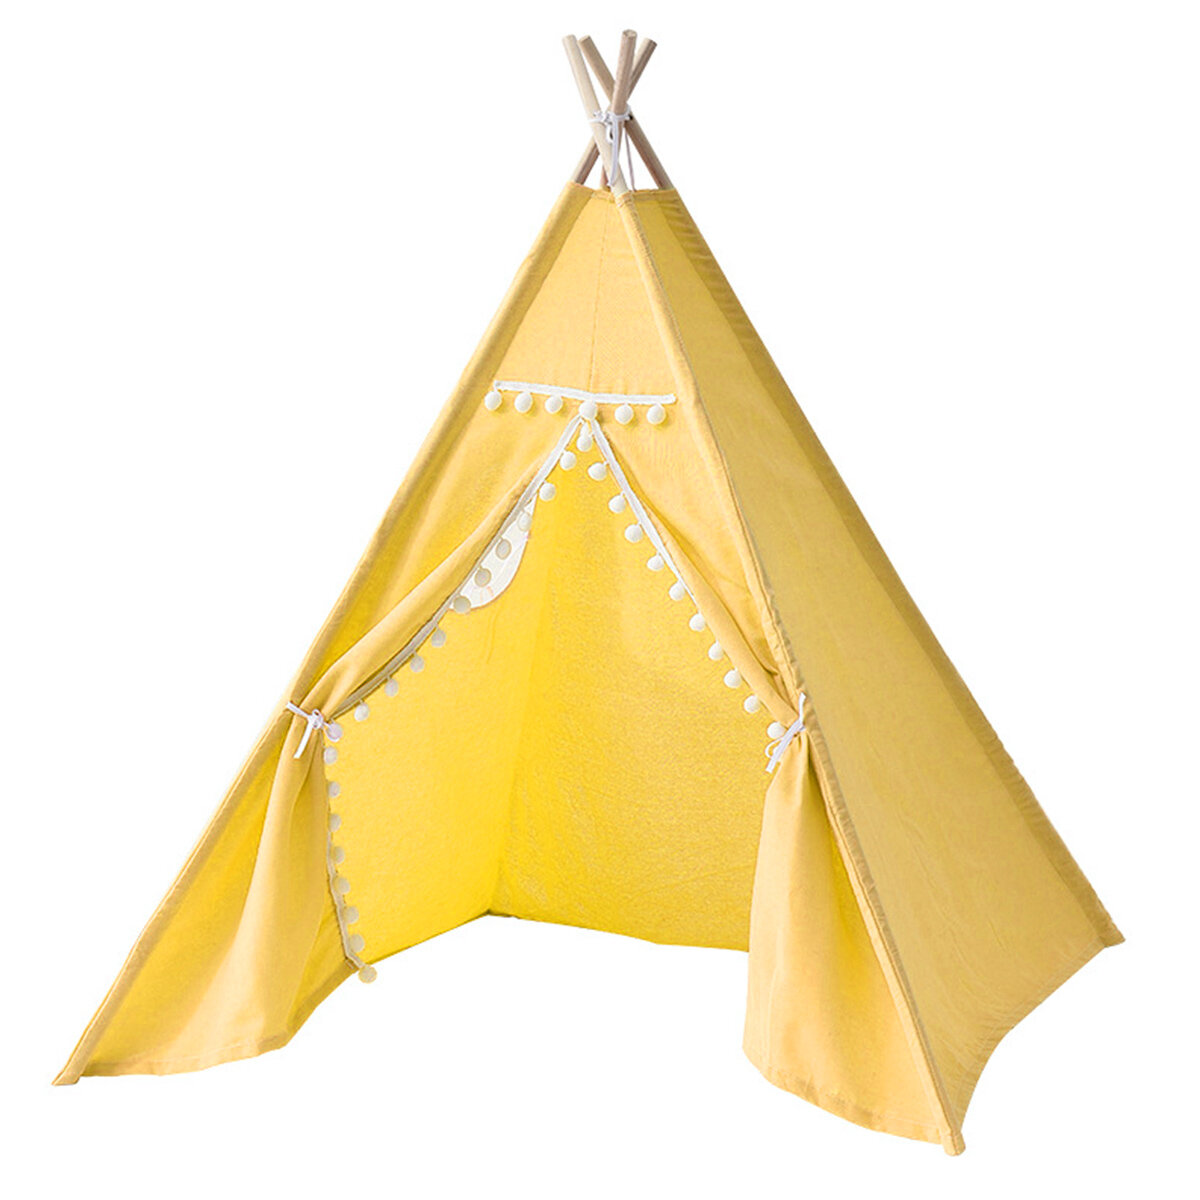 Kids Tent Cotton Canvas Children Play Tent House Game House Boy Girls Gift